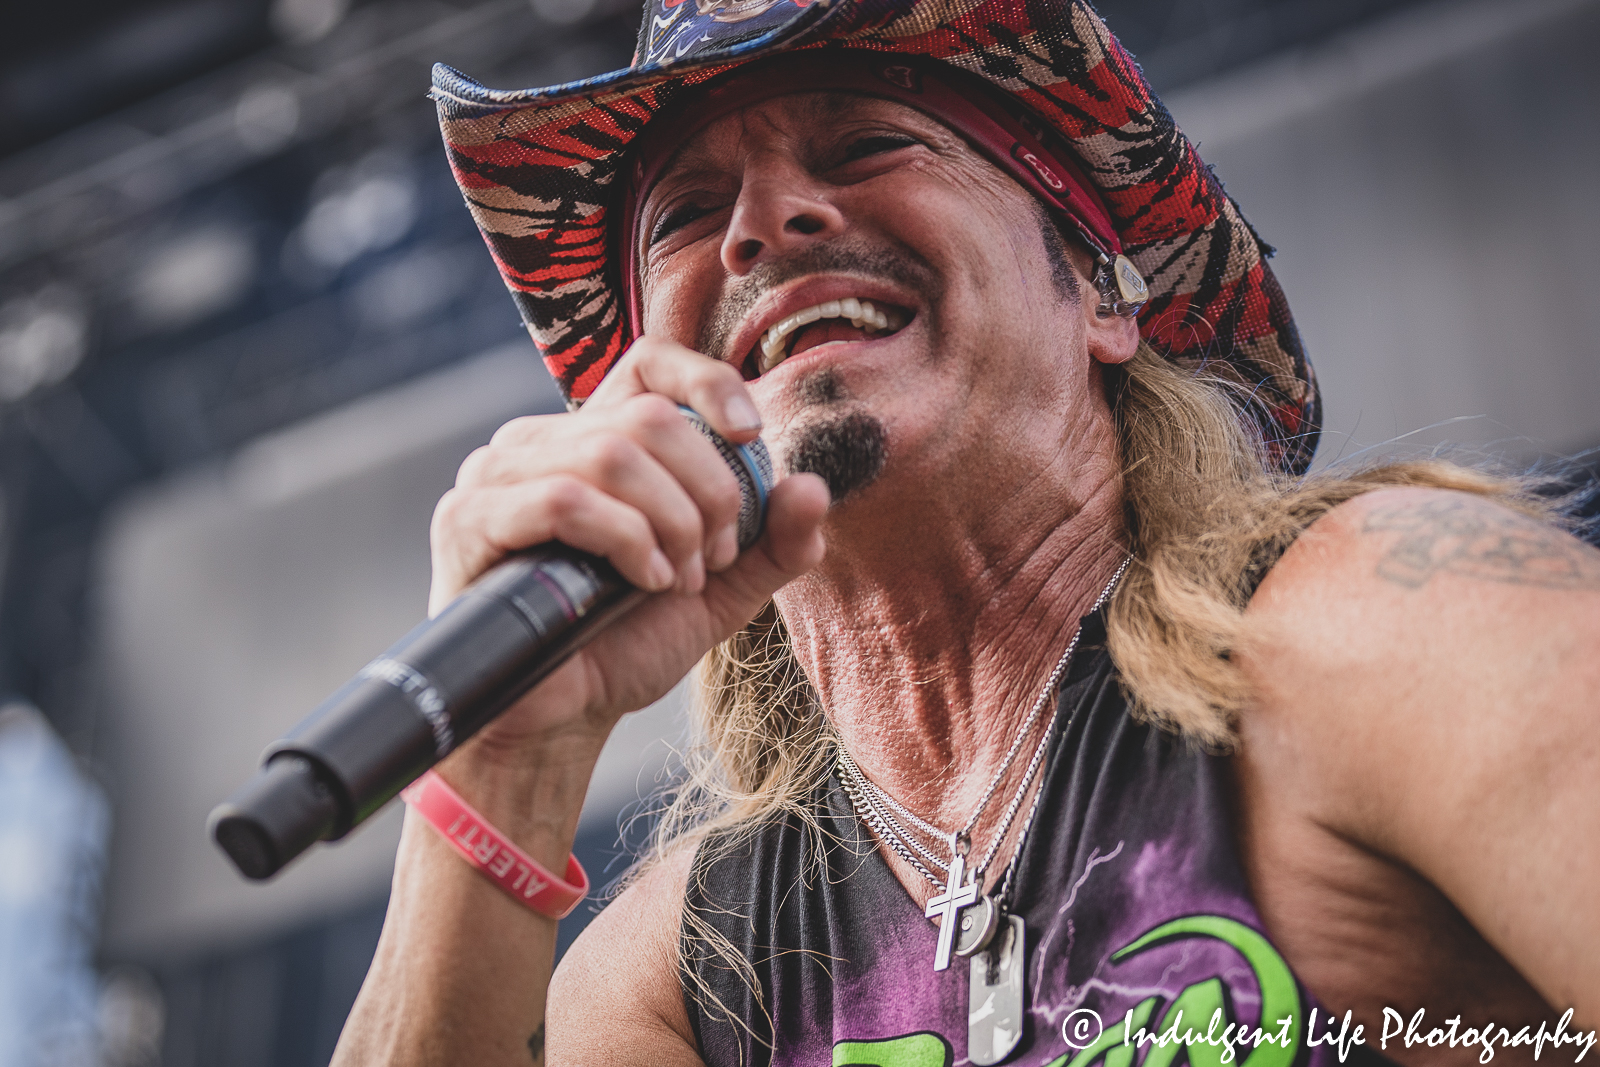 Frontman Bret Michaels of Poison singing live during the band's concert at Kauffman Stadium in Kansas City, MO on July 19, 2022.